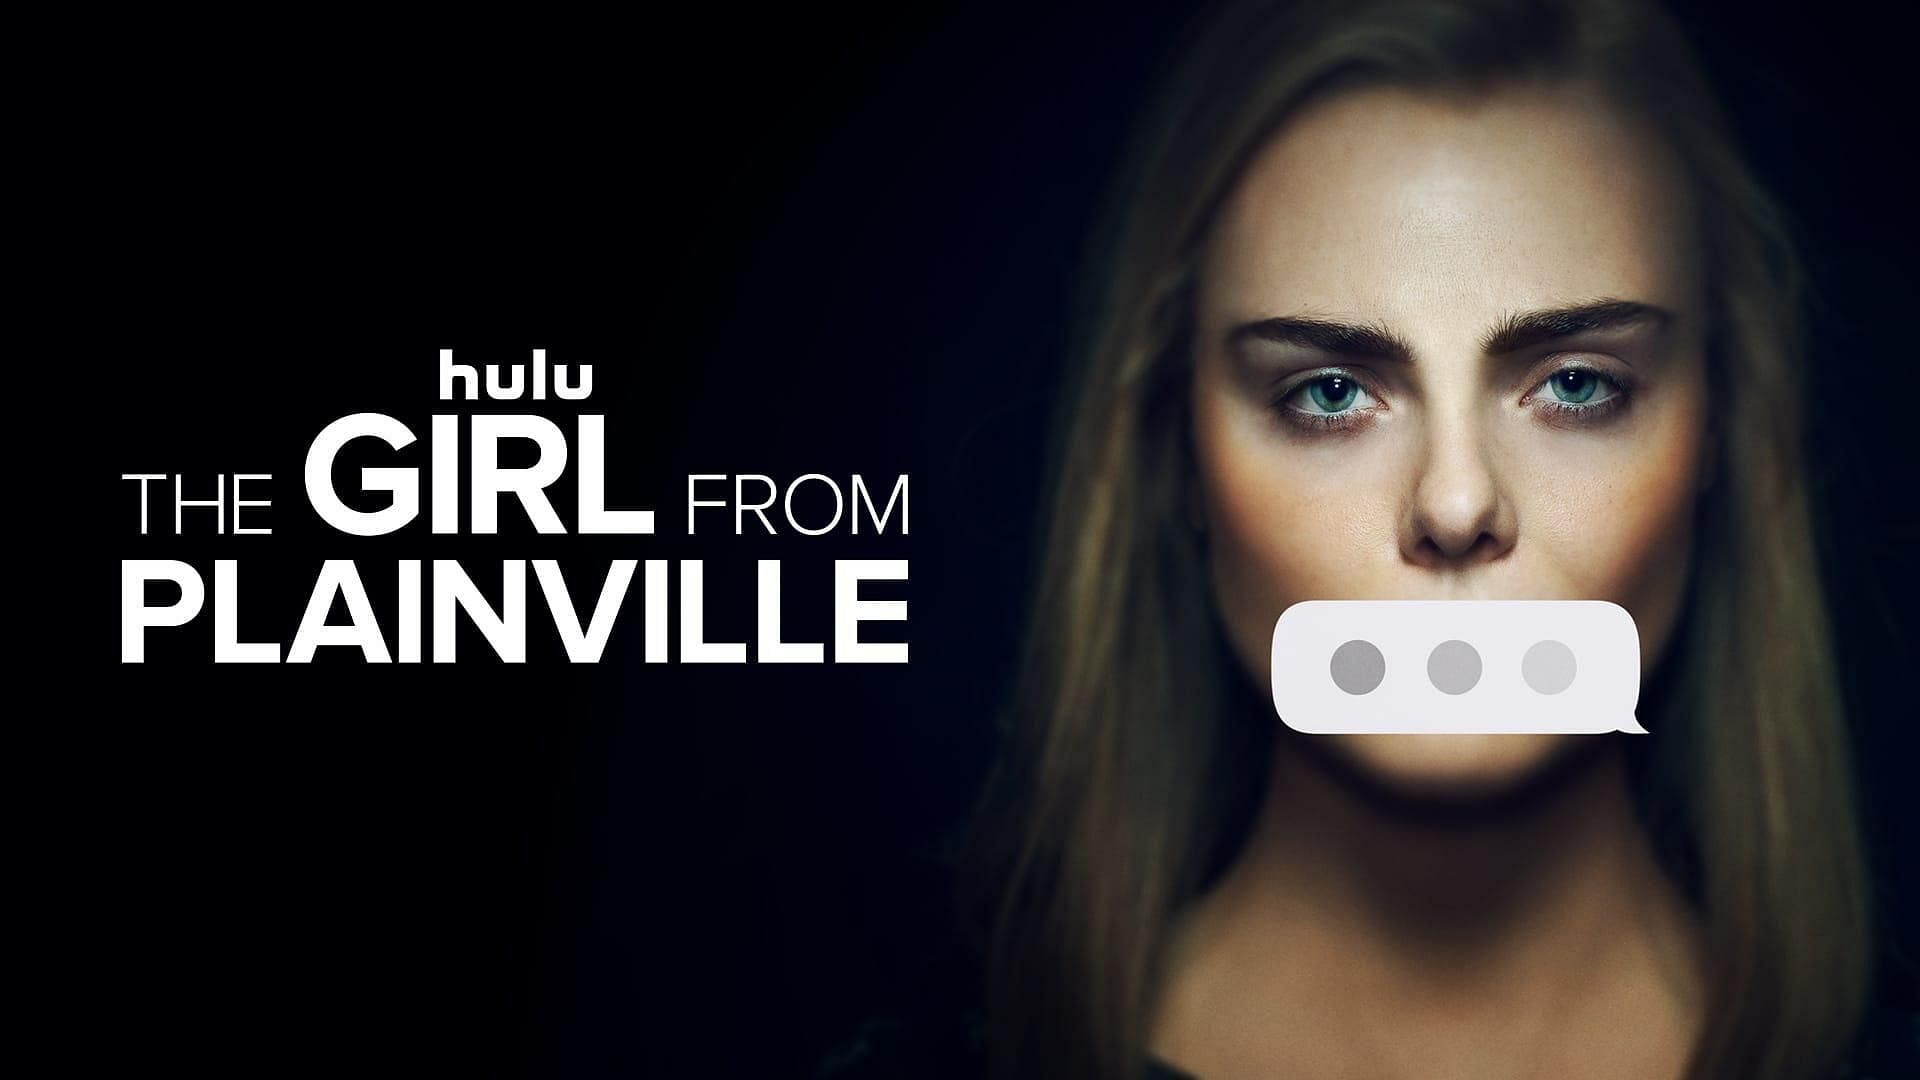 Ella Rubin also has a role in The Girl from Plainville. (Image via Hulu)